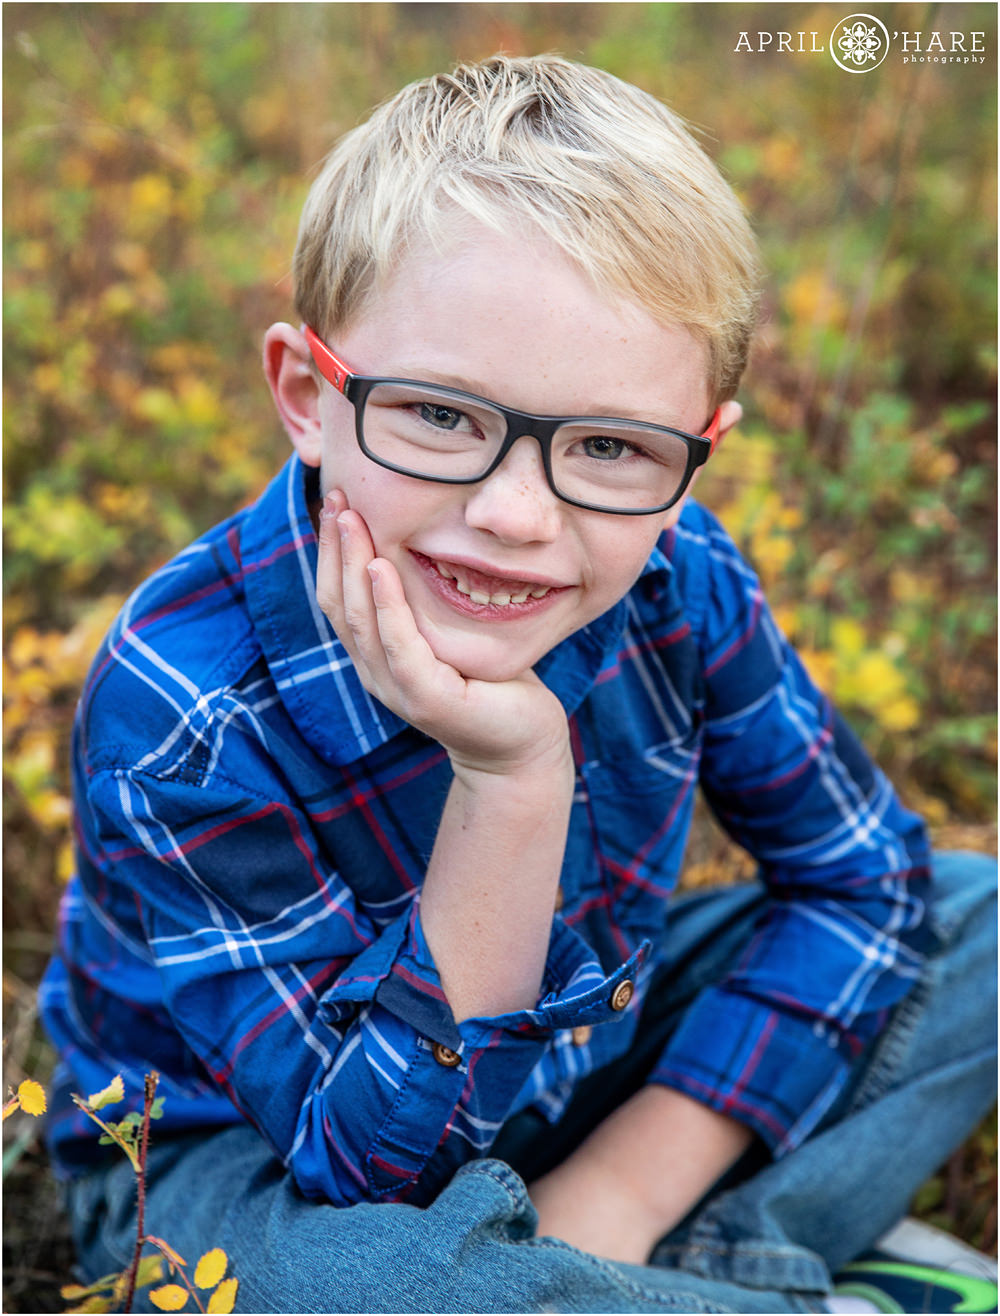 Cute individual photo of a young boy at his blended family photography session during fall at Fox Run Park